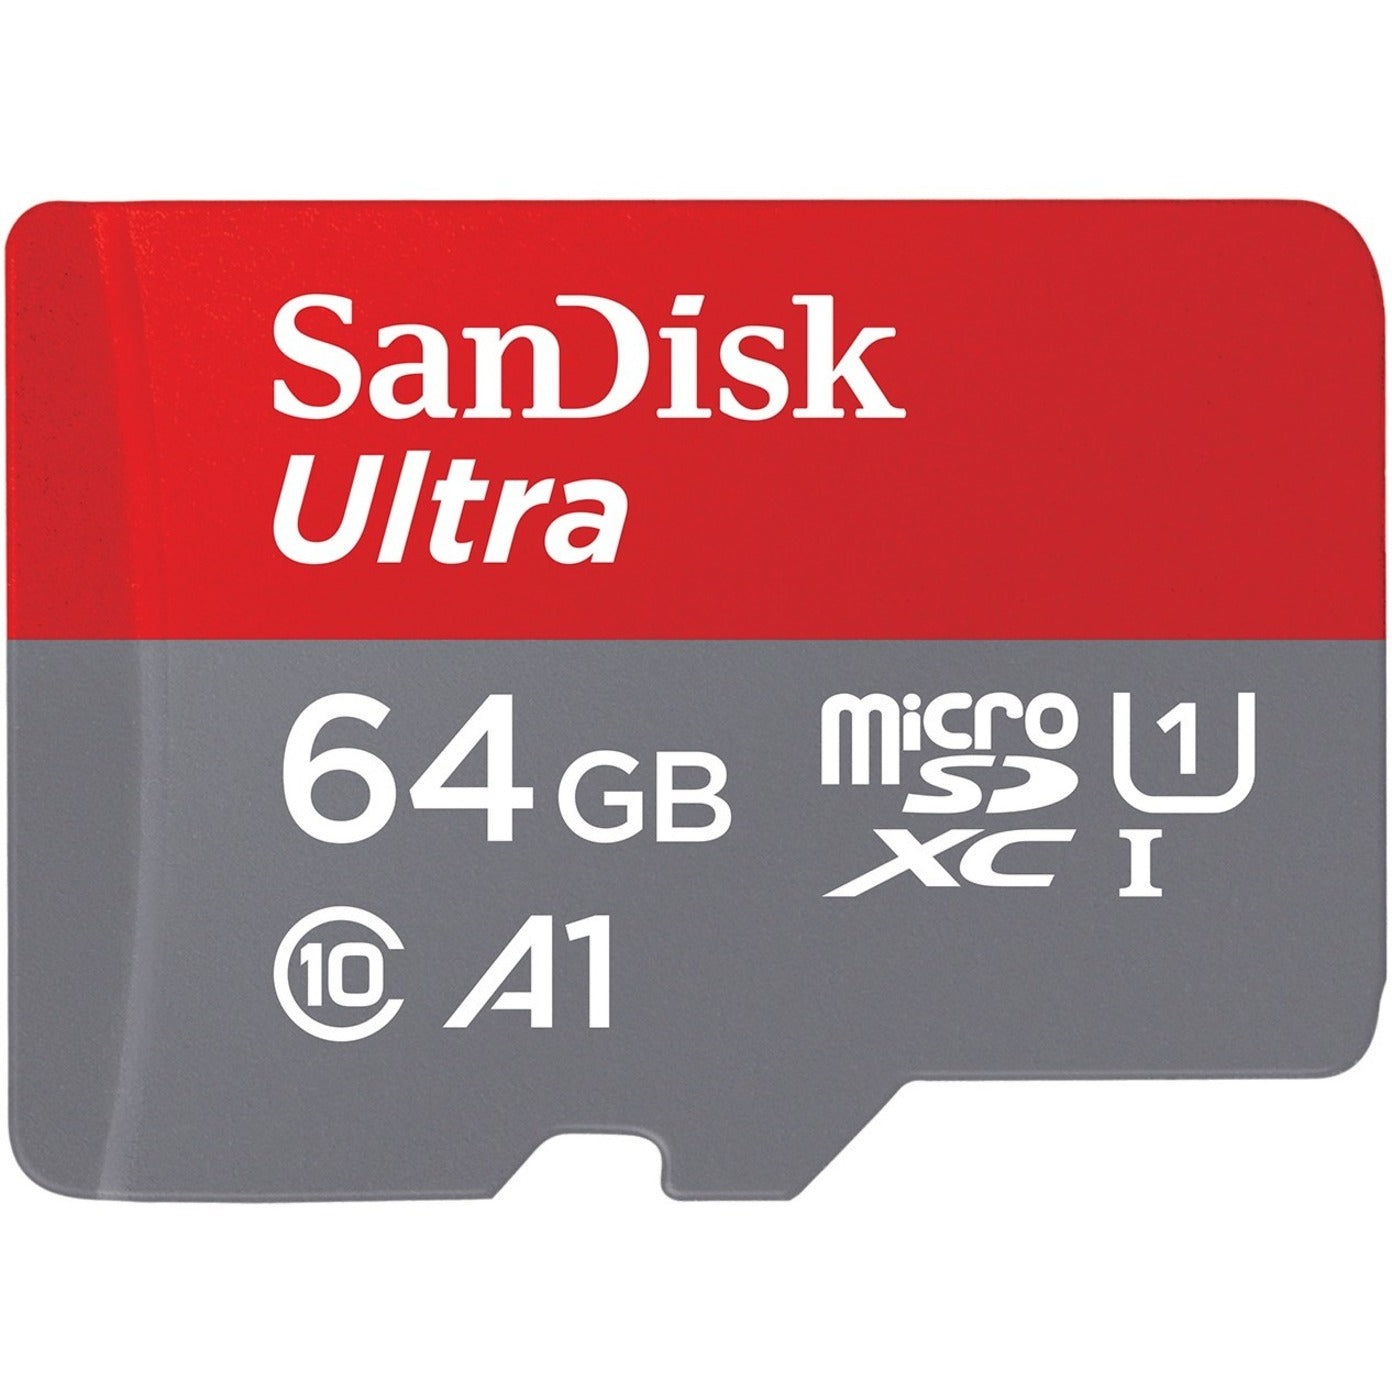 SanDisk SDSQUA4-064G-AN6MA Ultra microSDXC UHS-I Card with Adapter - 64GB, Class 10, 120 MB/s Data Transfer Rate